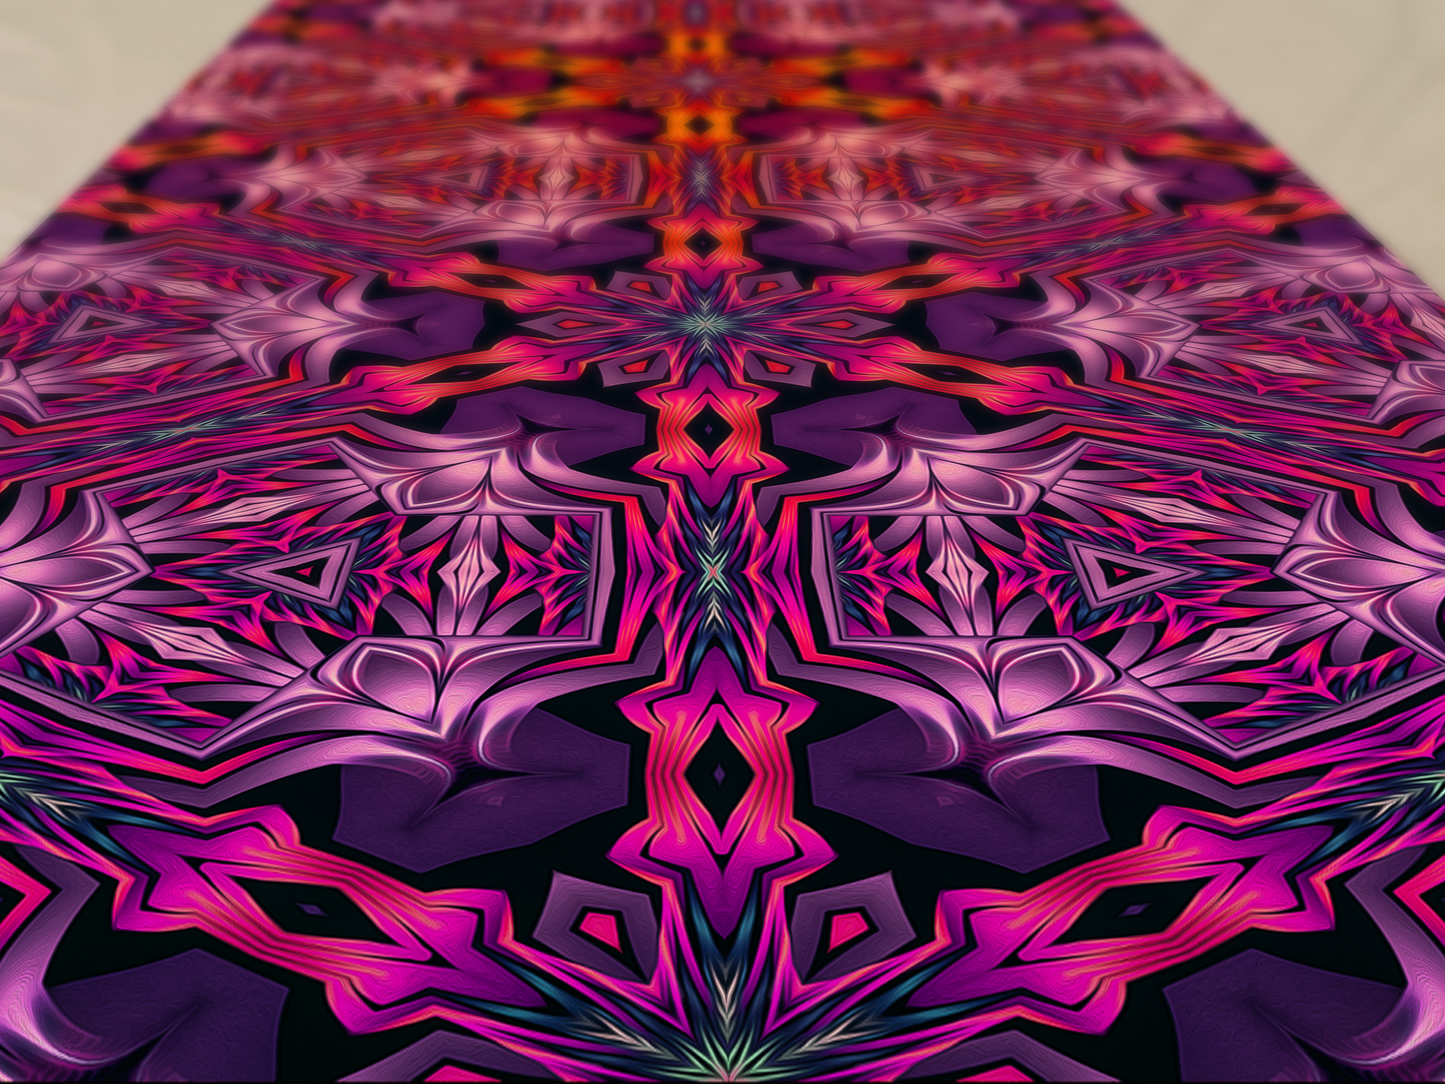 "Forged In Neon" - YOGA MAT